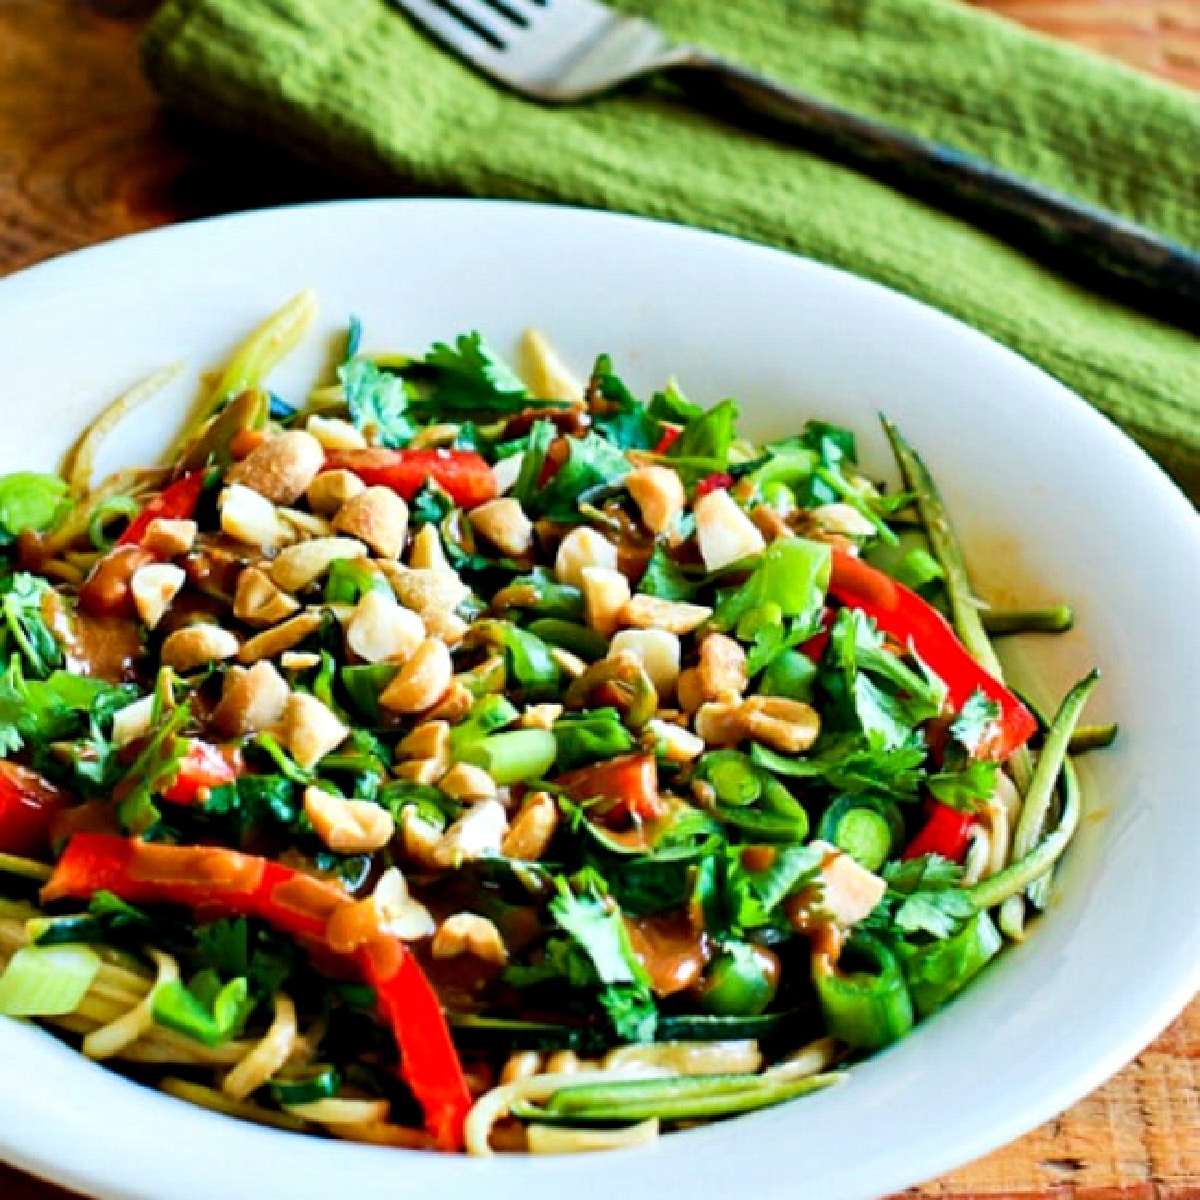 Zucchini Noodle Bowl with Peanut Sauce on wood table with green napkin